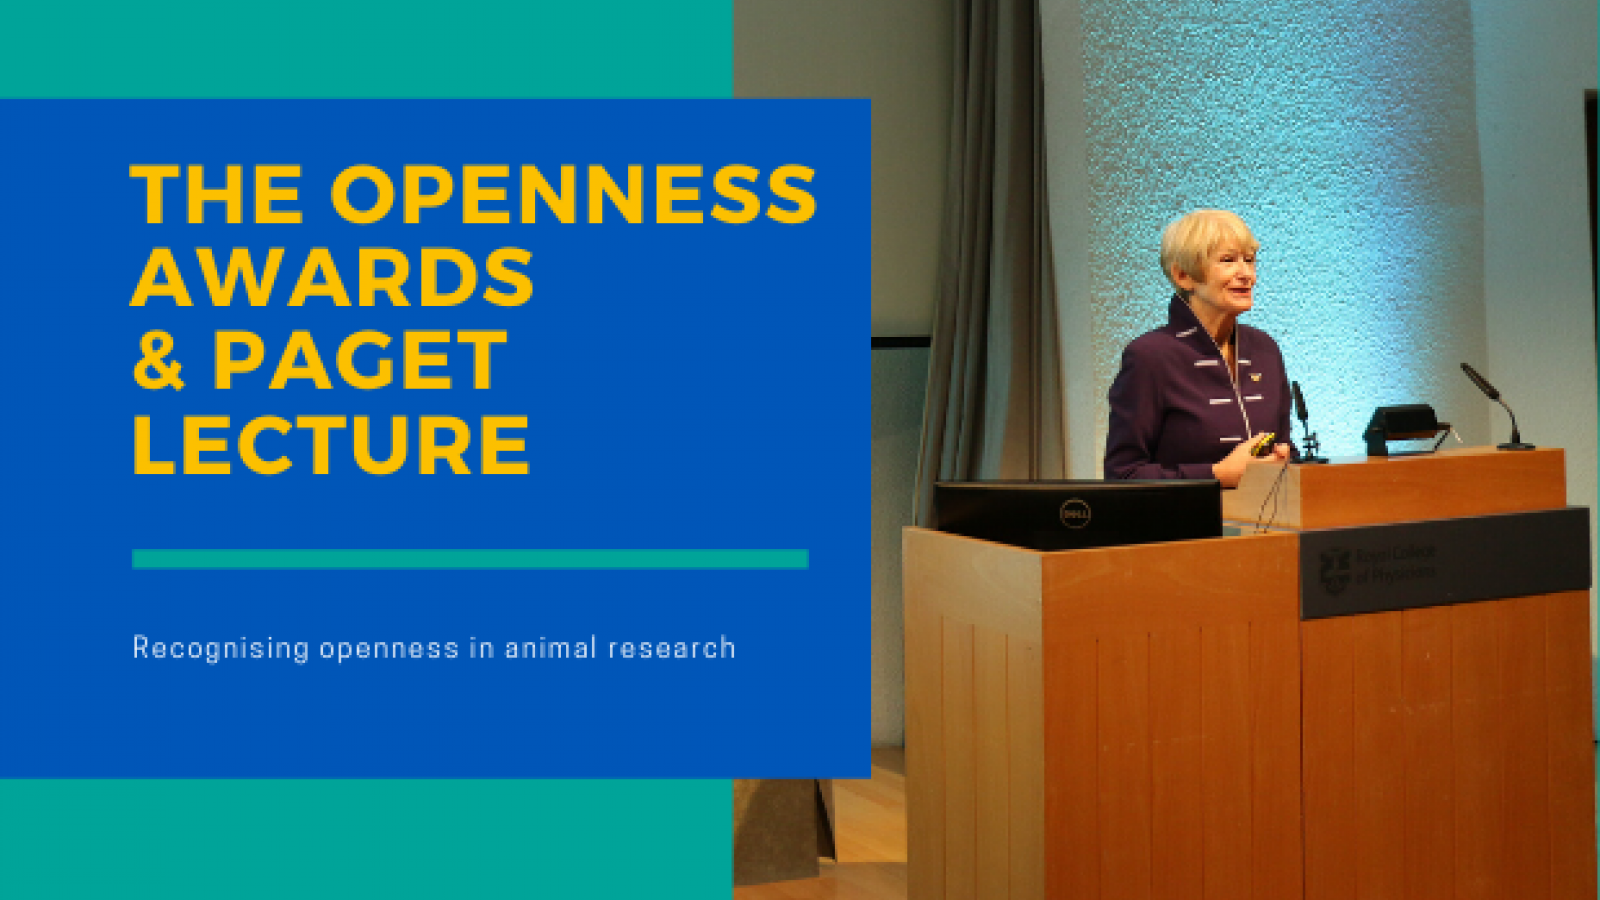 Openness Awards and Paget Lecture 2019